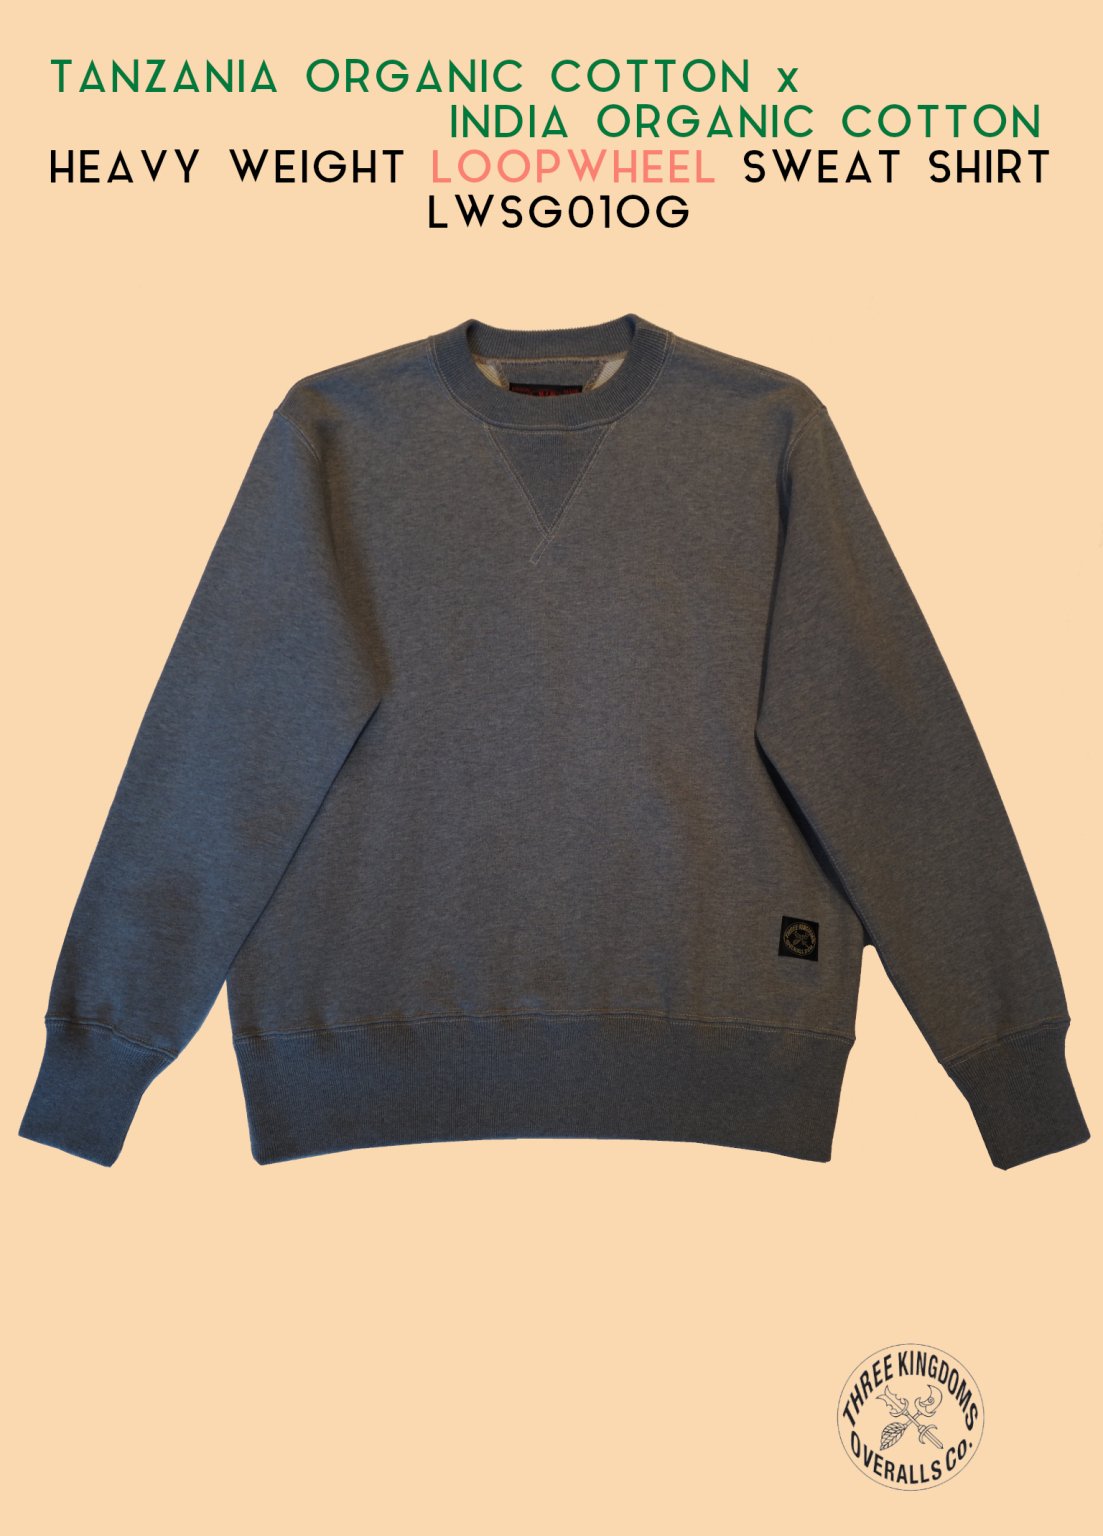 LWSG01OG HEAVY WEIGHT LOOPWHEEL SWEAT SHIRT<img class='new_mark_img2' src='https://img.shop-pro.jp/img/new/icons14.gif' style='border:none;display:inline;margin:0px;padding:0px;width:auto;' />